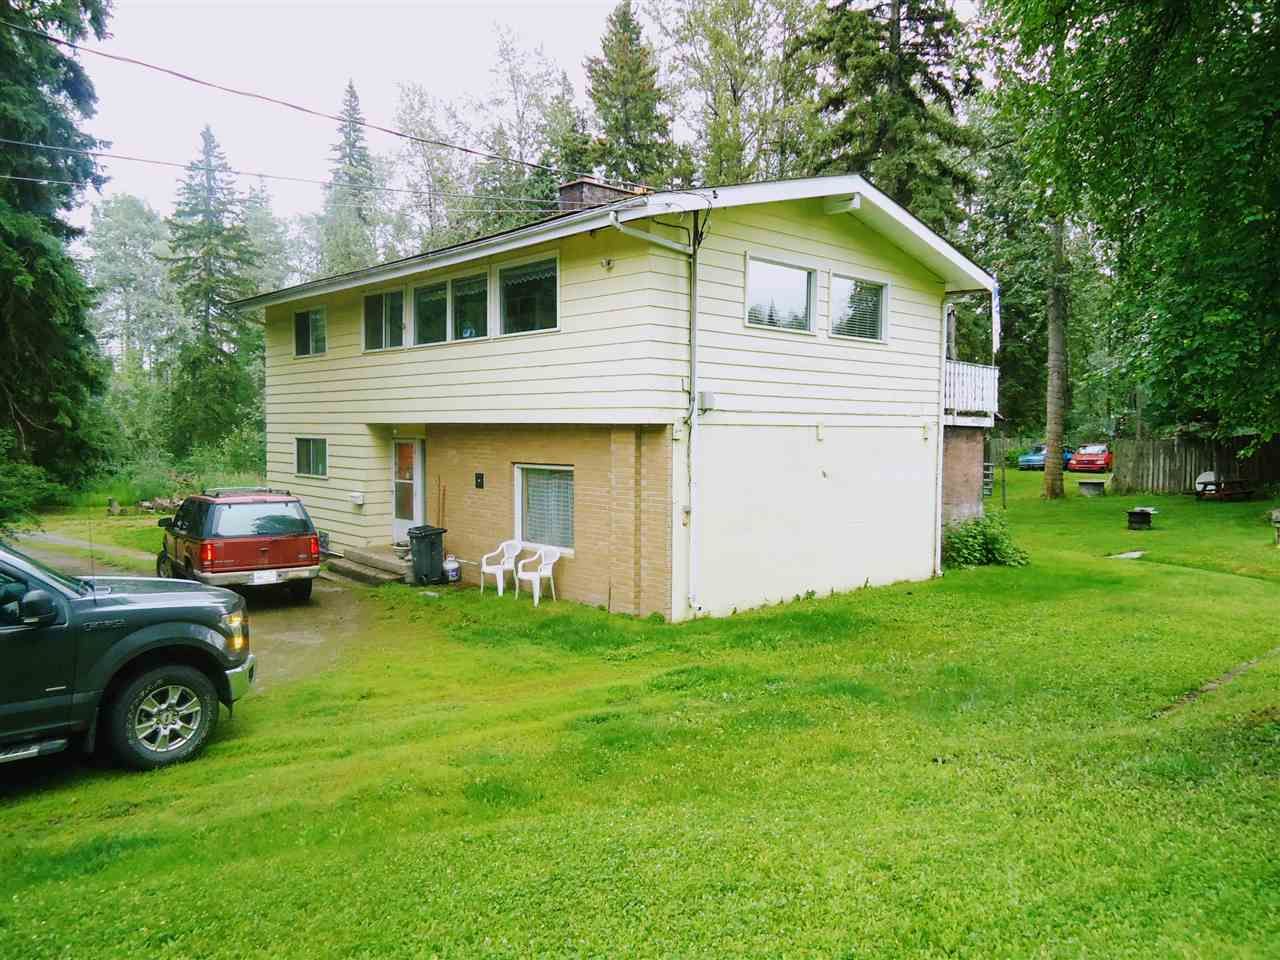 Main Photo: 6623 W PURDUE Road in Prince George: Gauthier House for sale (PG City South (Zone 74))  : MLS®# R2387769